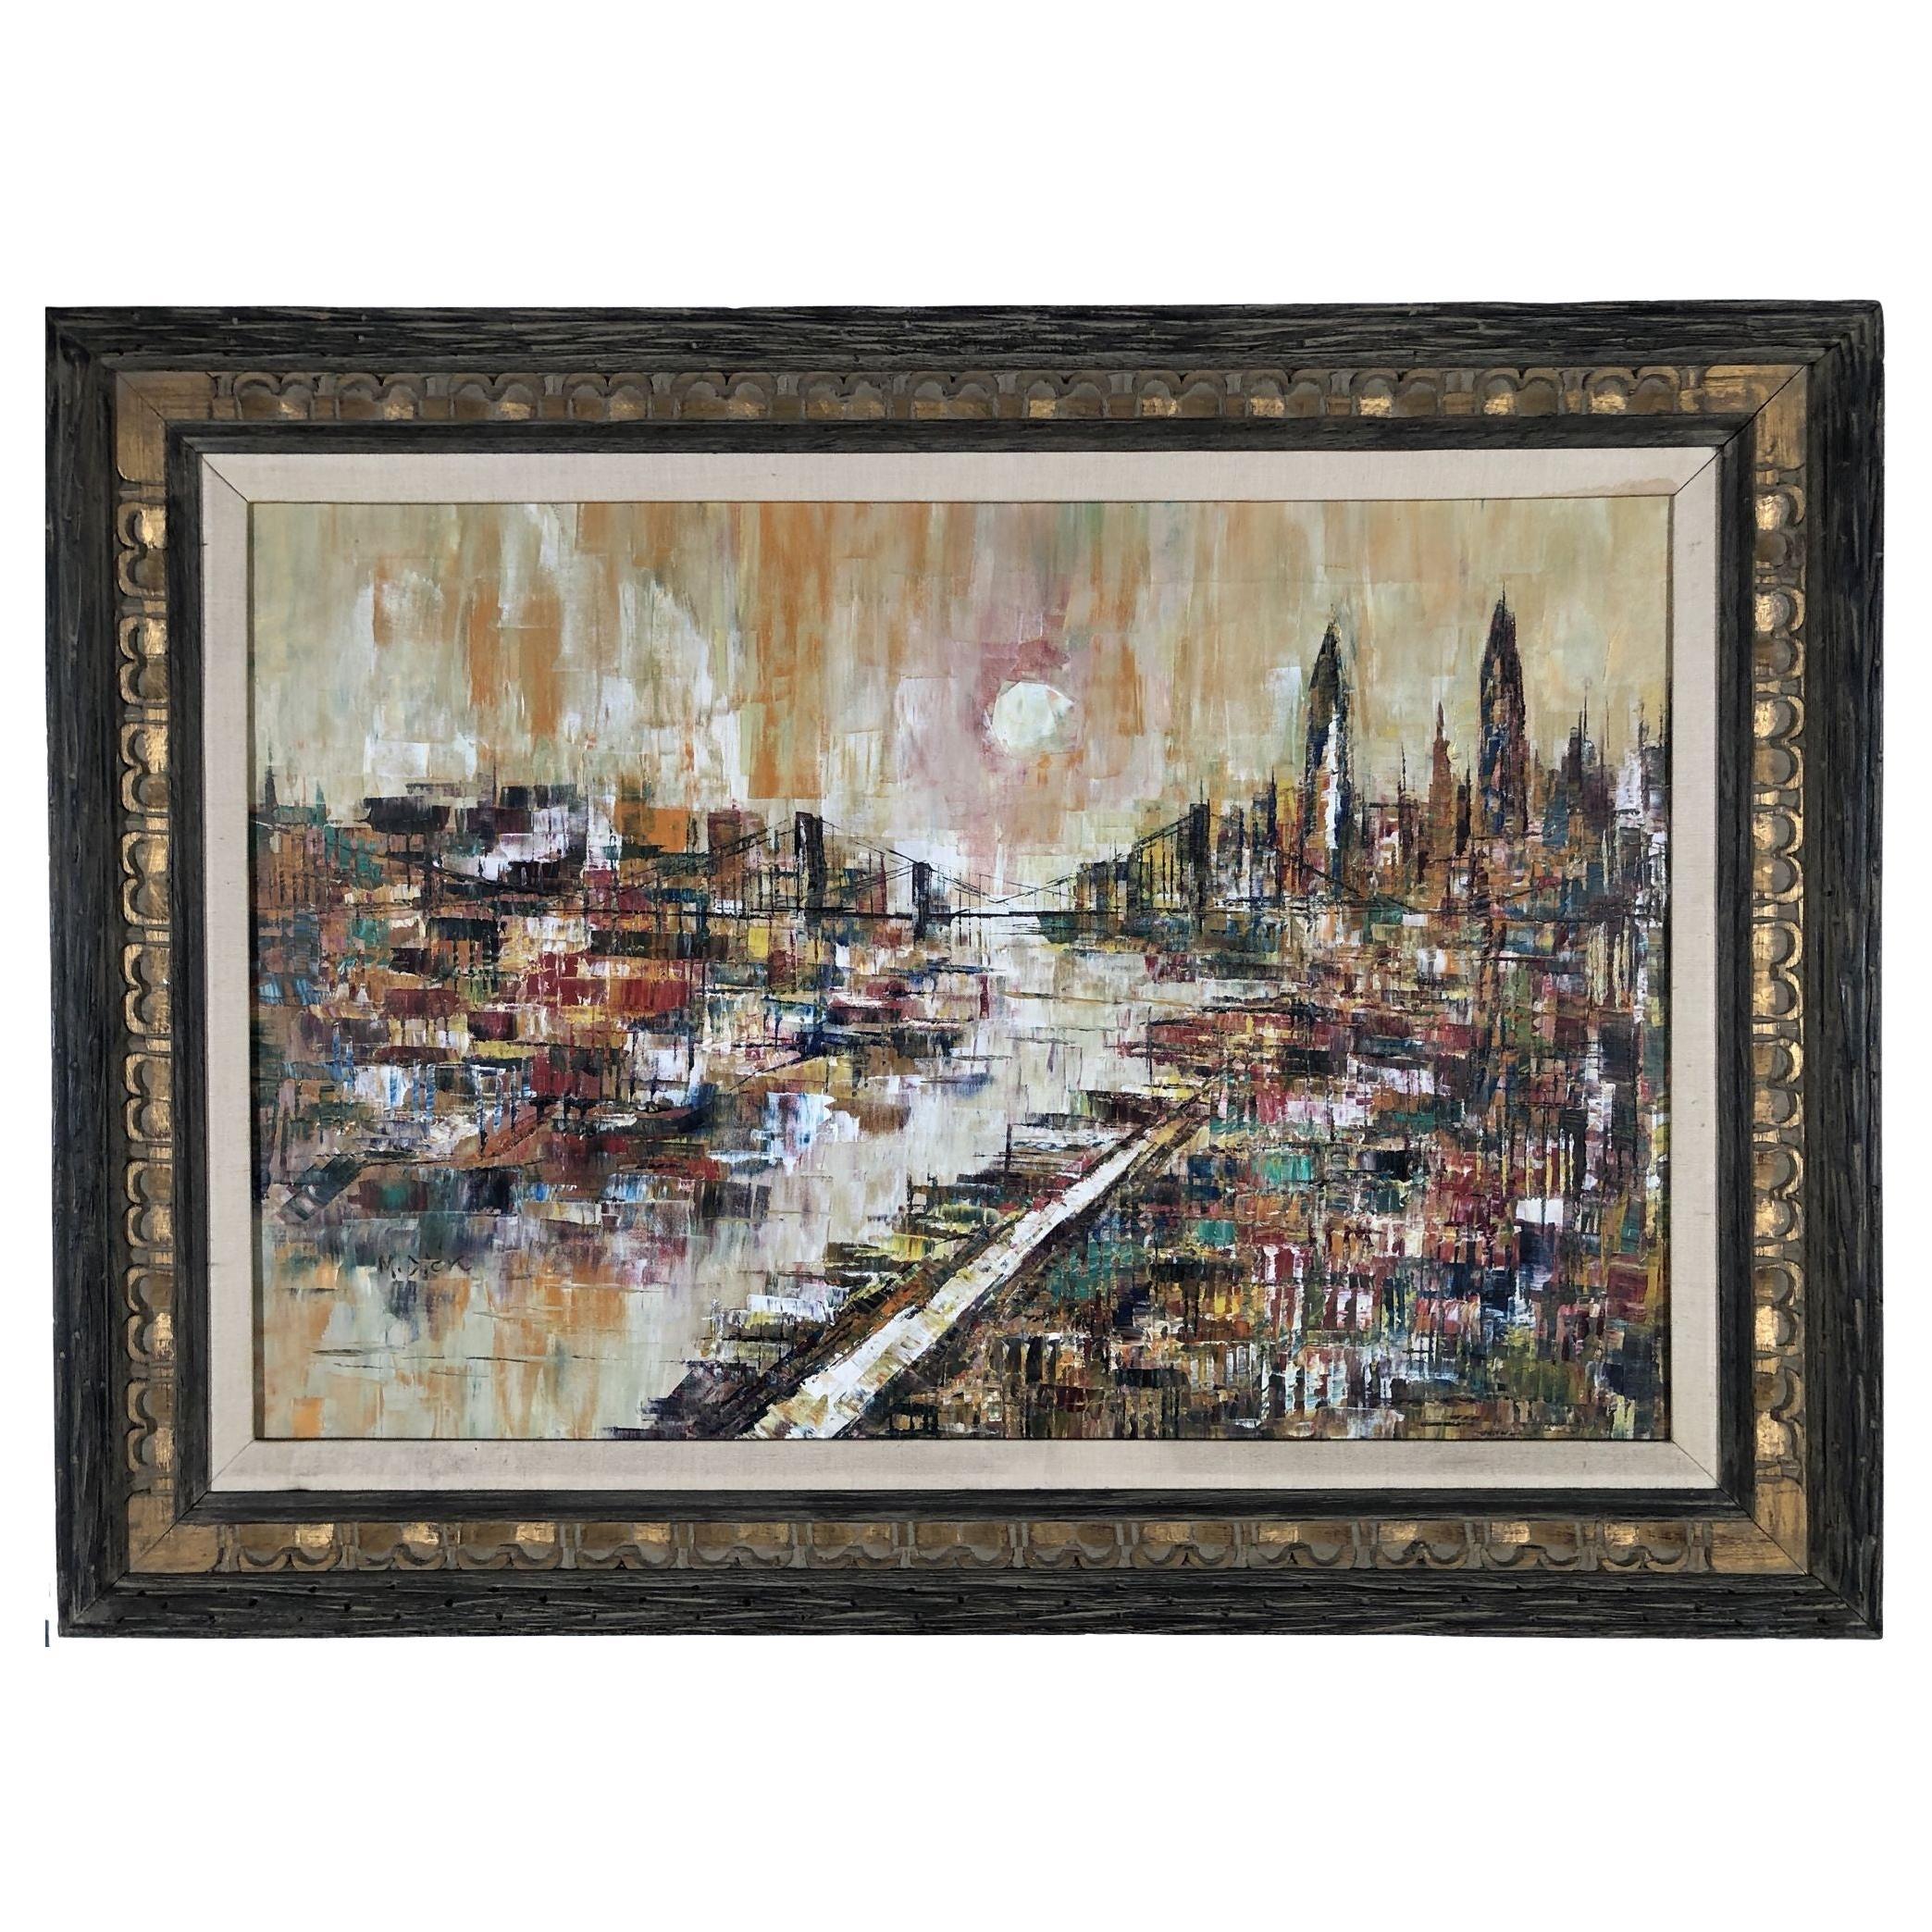 Framed Mid-Century Oil Painting of Bridge and Cityscape Signed by M. Dick